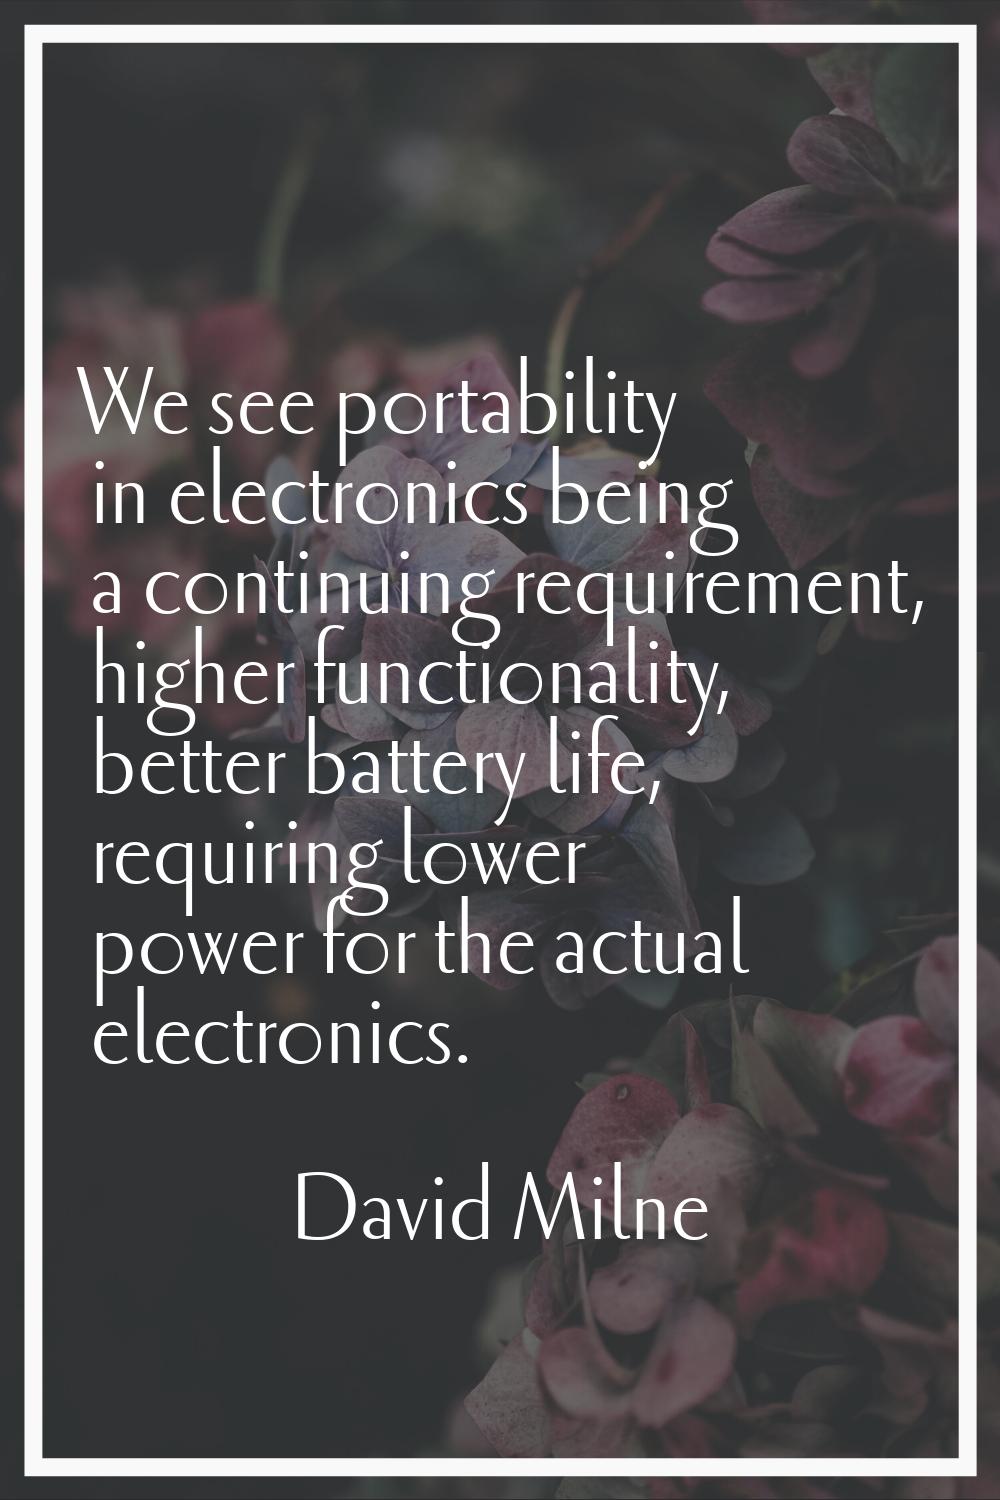 We see portability in electronics being a continuing requirement, higher functionality, better batt